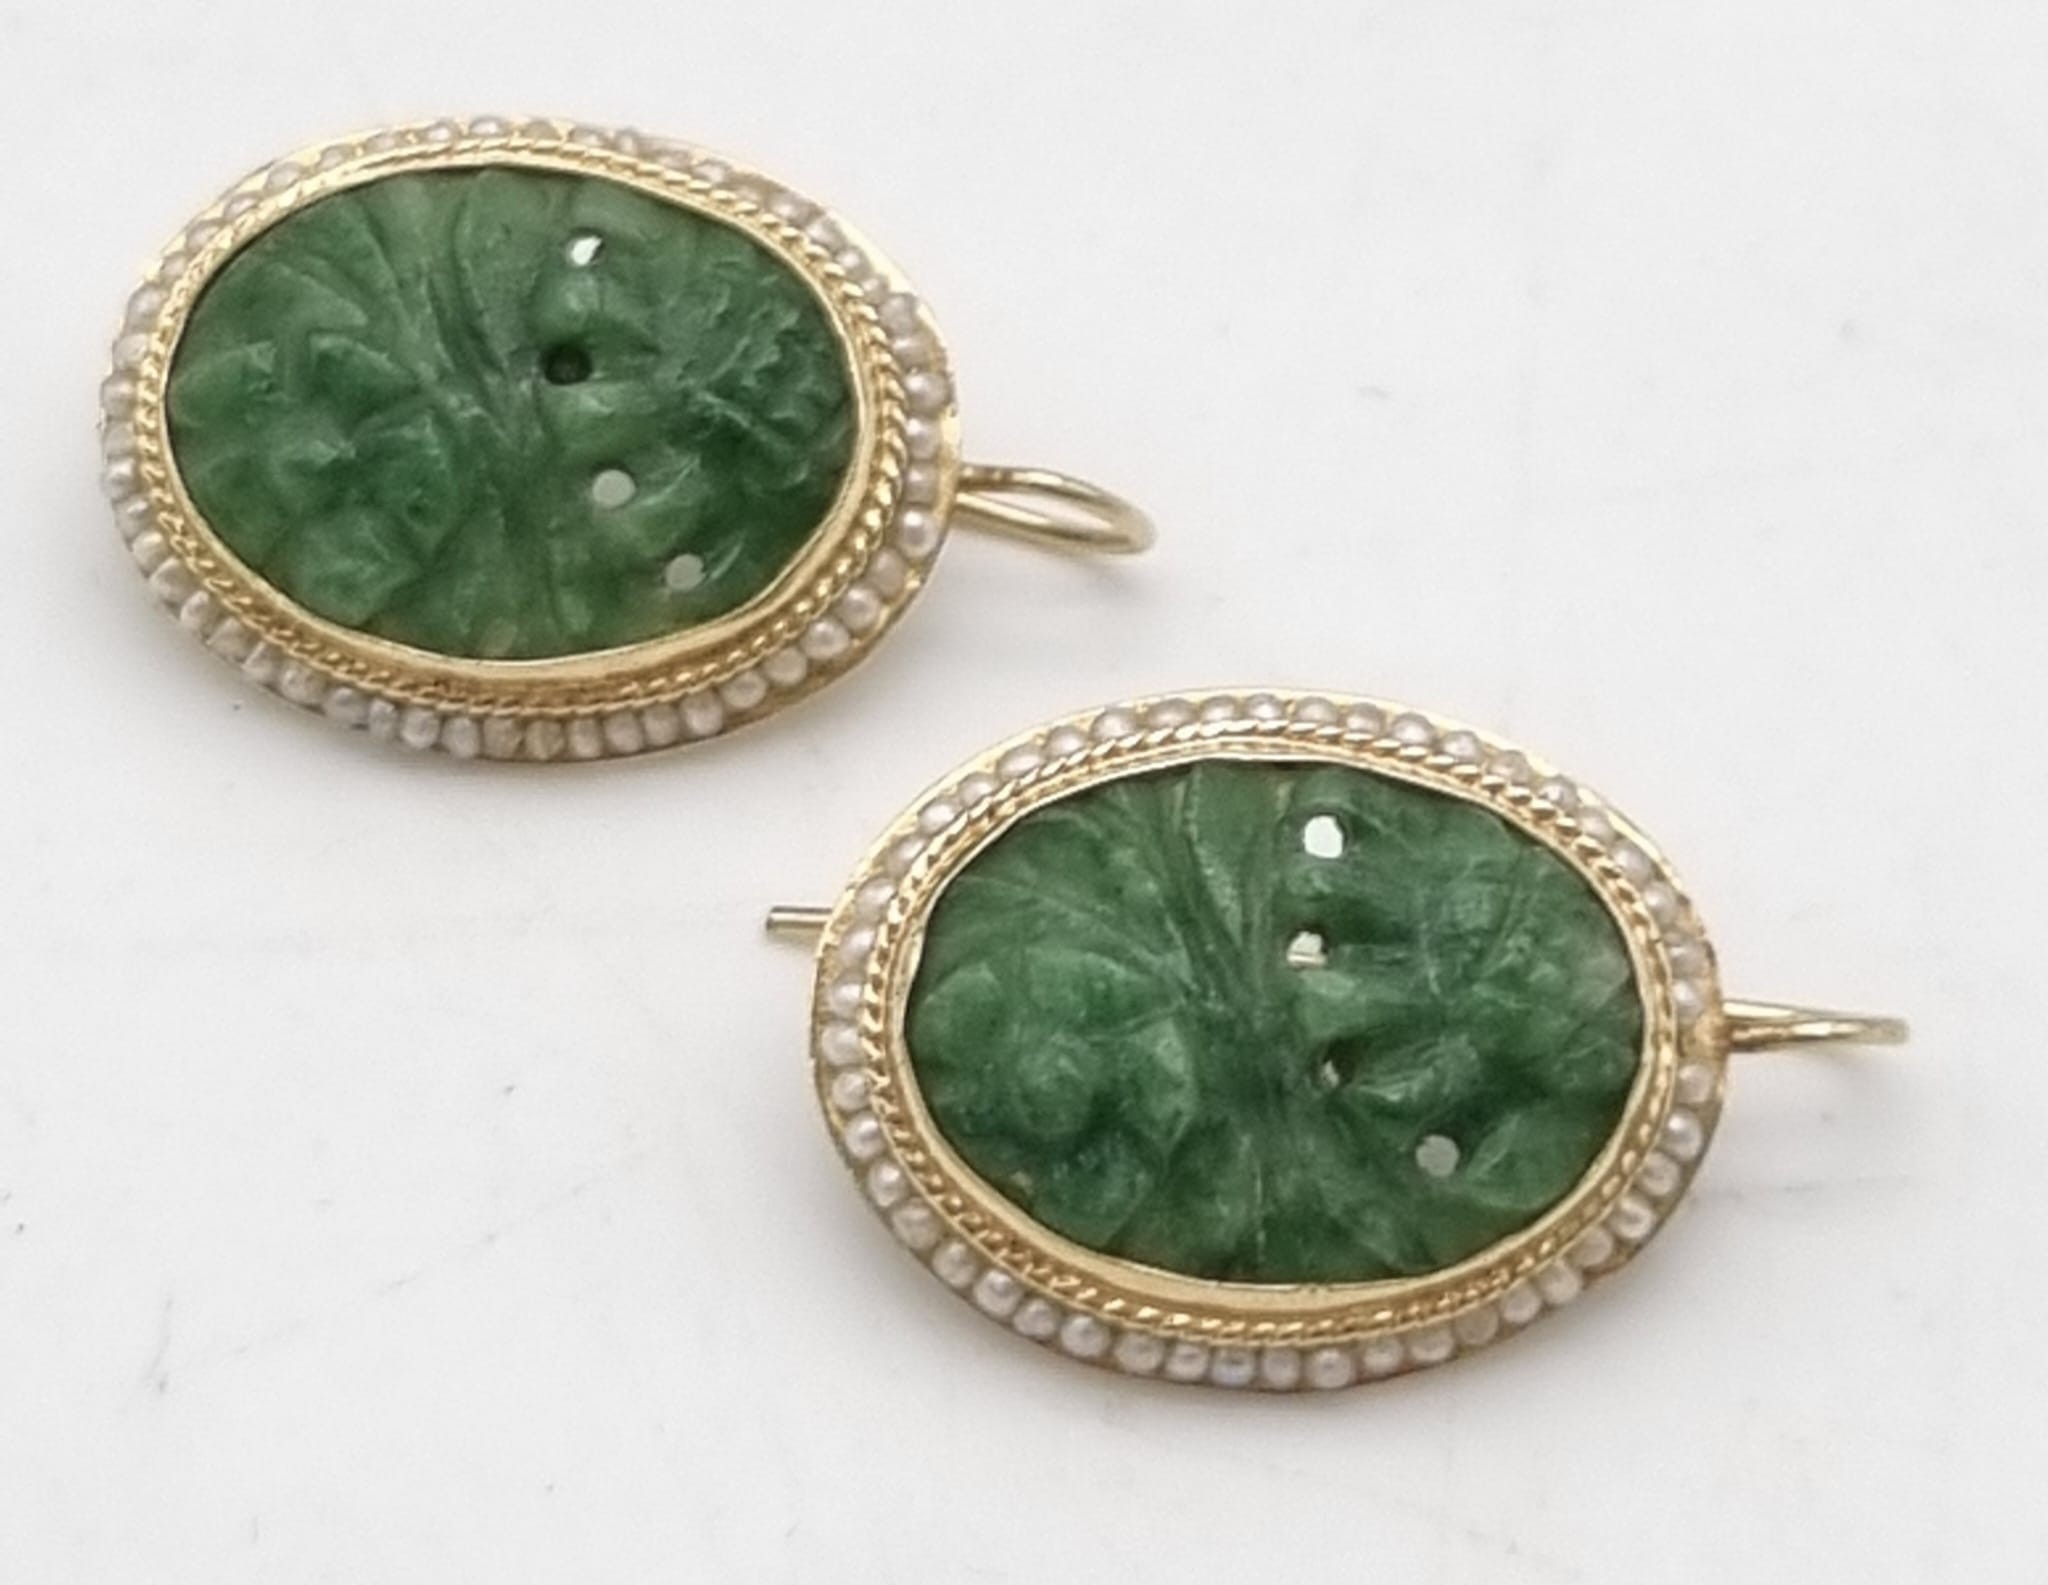 A vintage 14k yellow gold pair of earrings with carved oval jade surrounded by seed natural pearls.